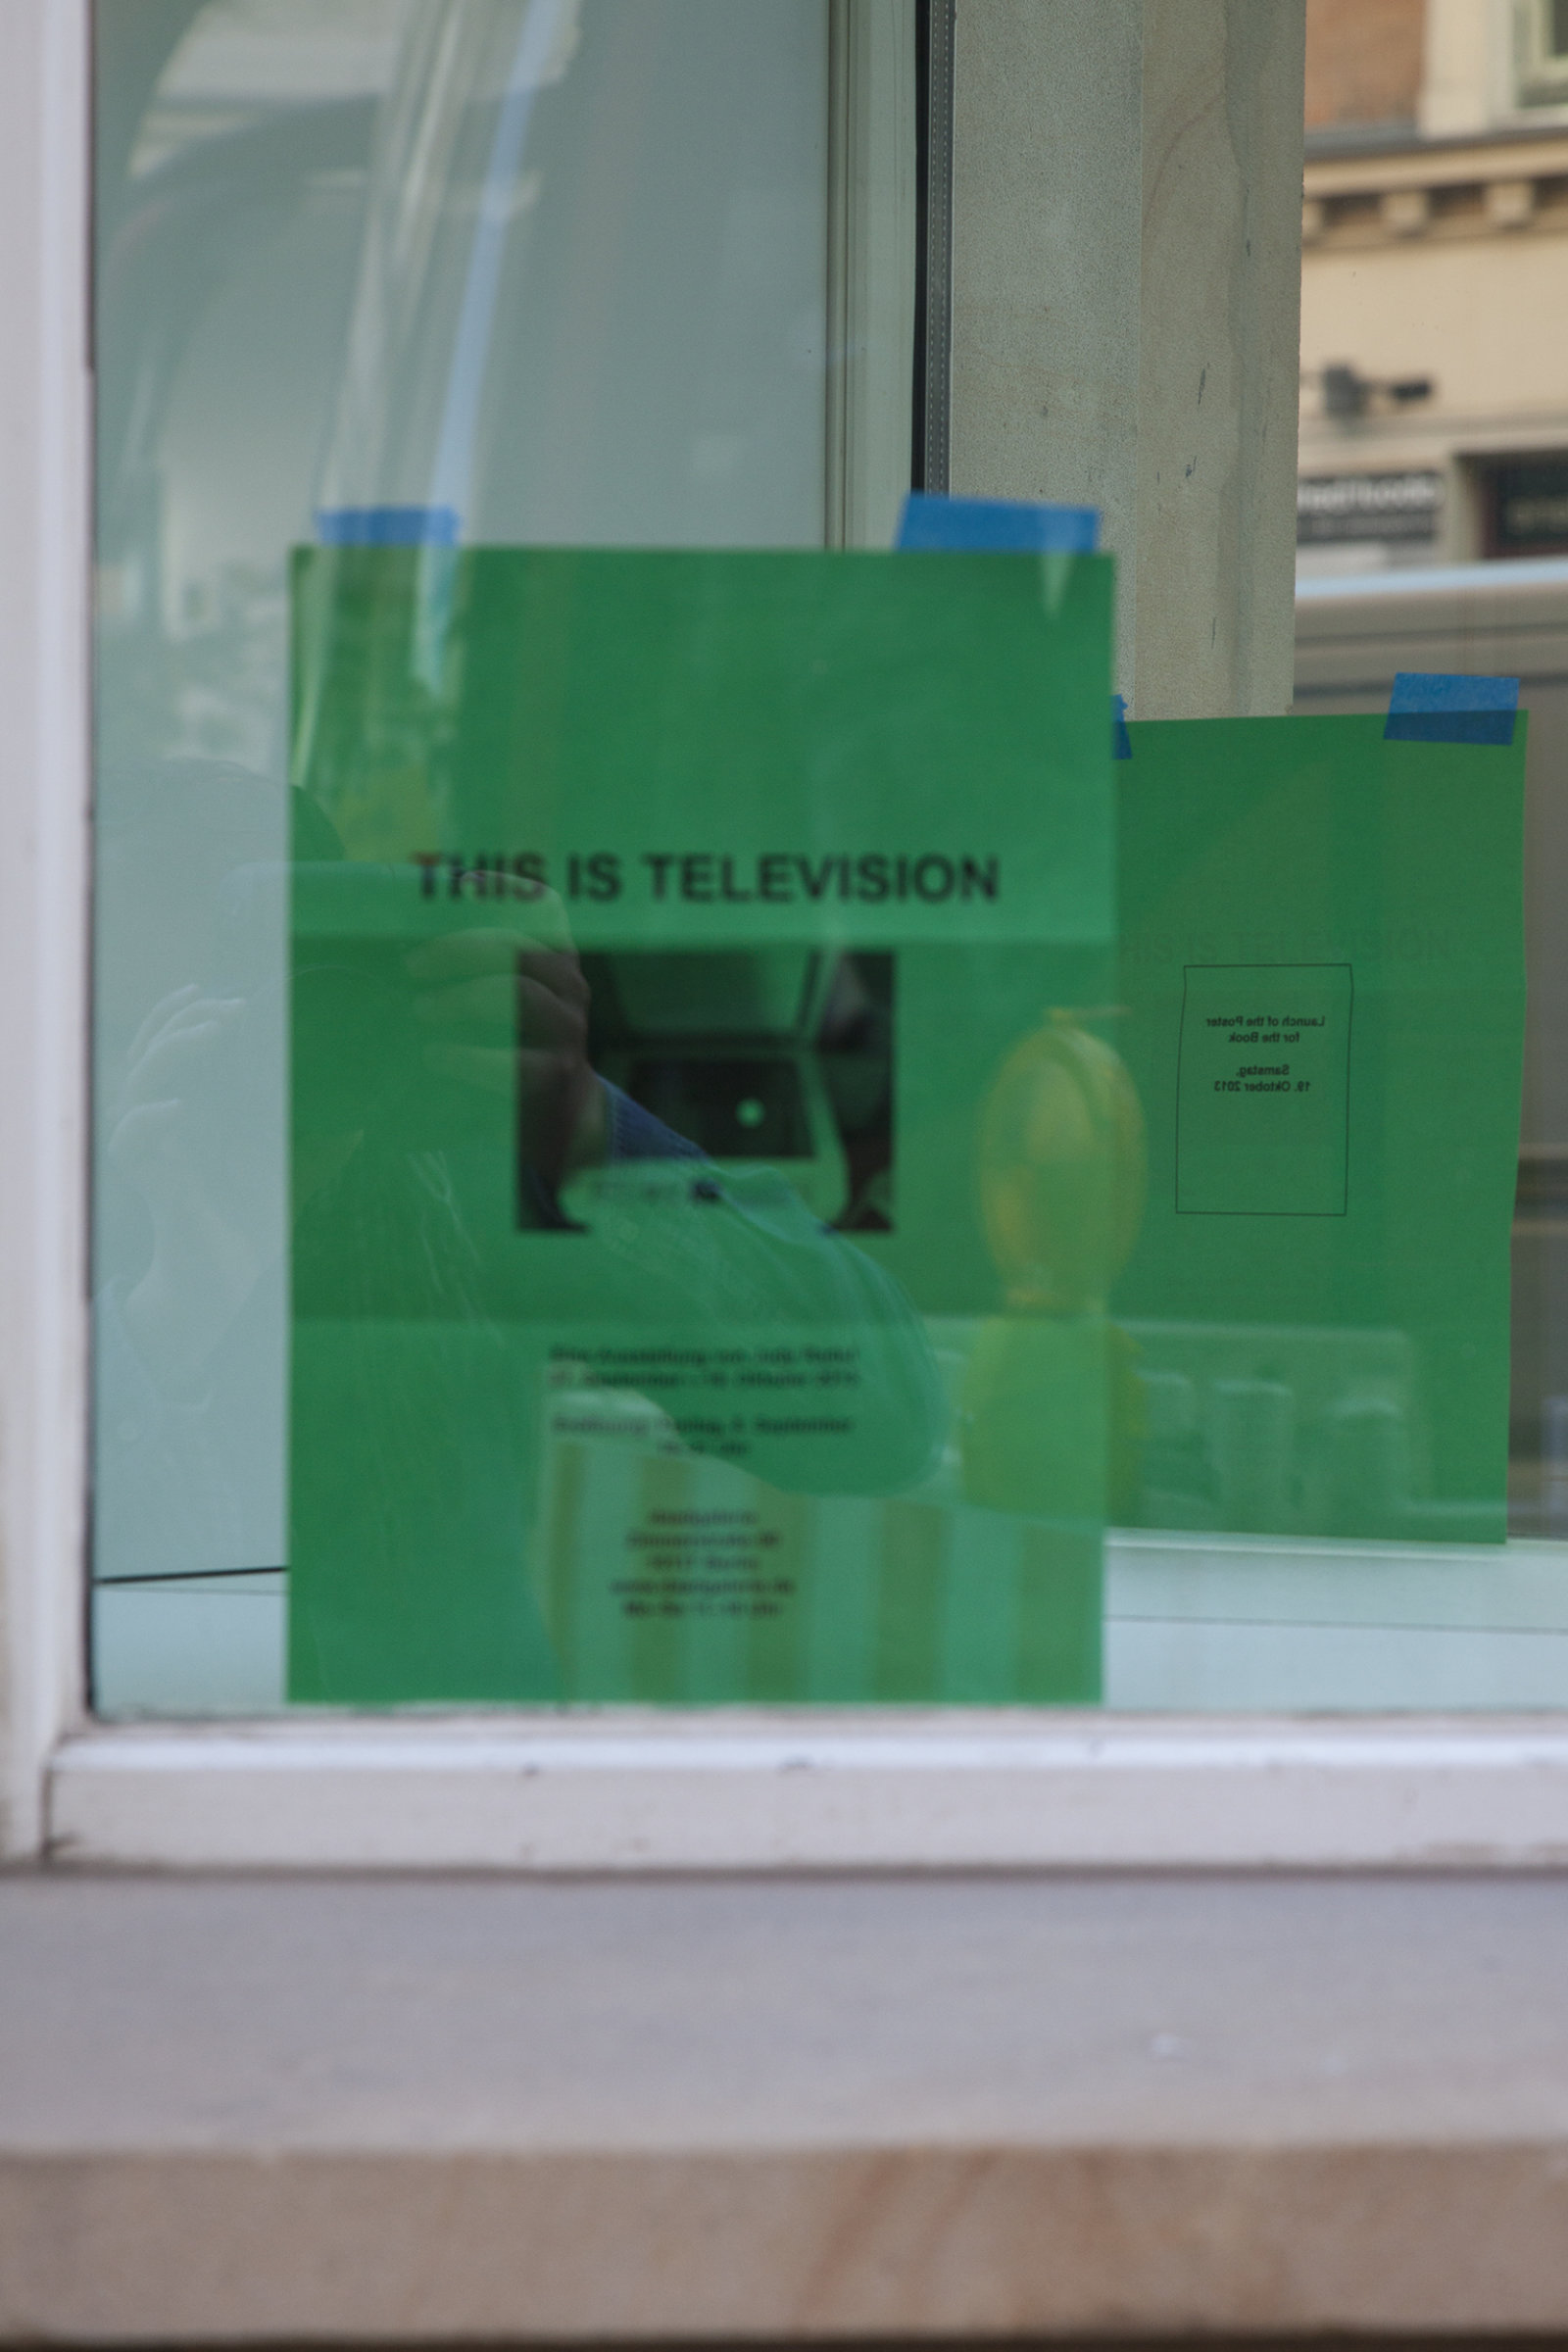 Judy Radul, EXHIBITION INVITATION (detail), 2013, mirror, black and white photocopy on green paper, dimensions variable. Installation view, This is Television, Daadgalerie, Berlin, Germany, 2013